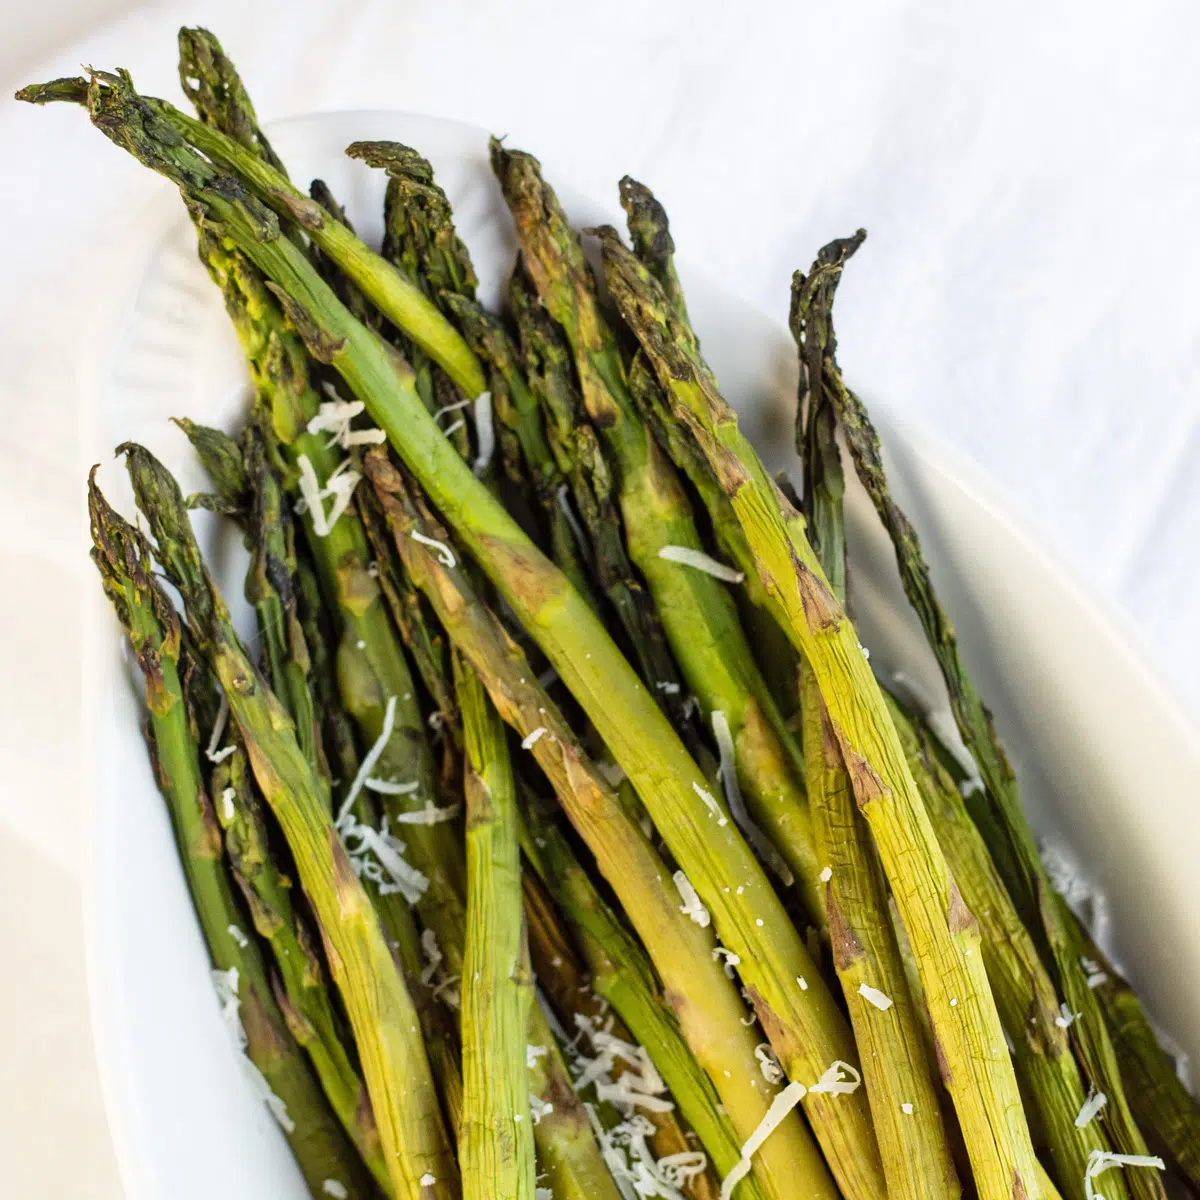 Smoked asparagus with freshly grated parmesan cheese on light background.